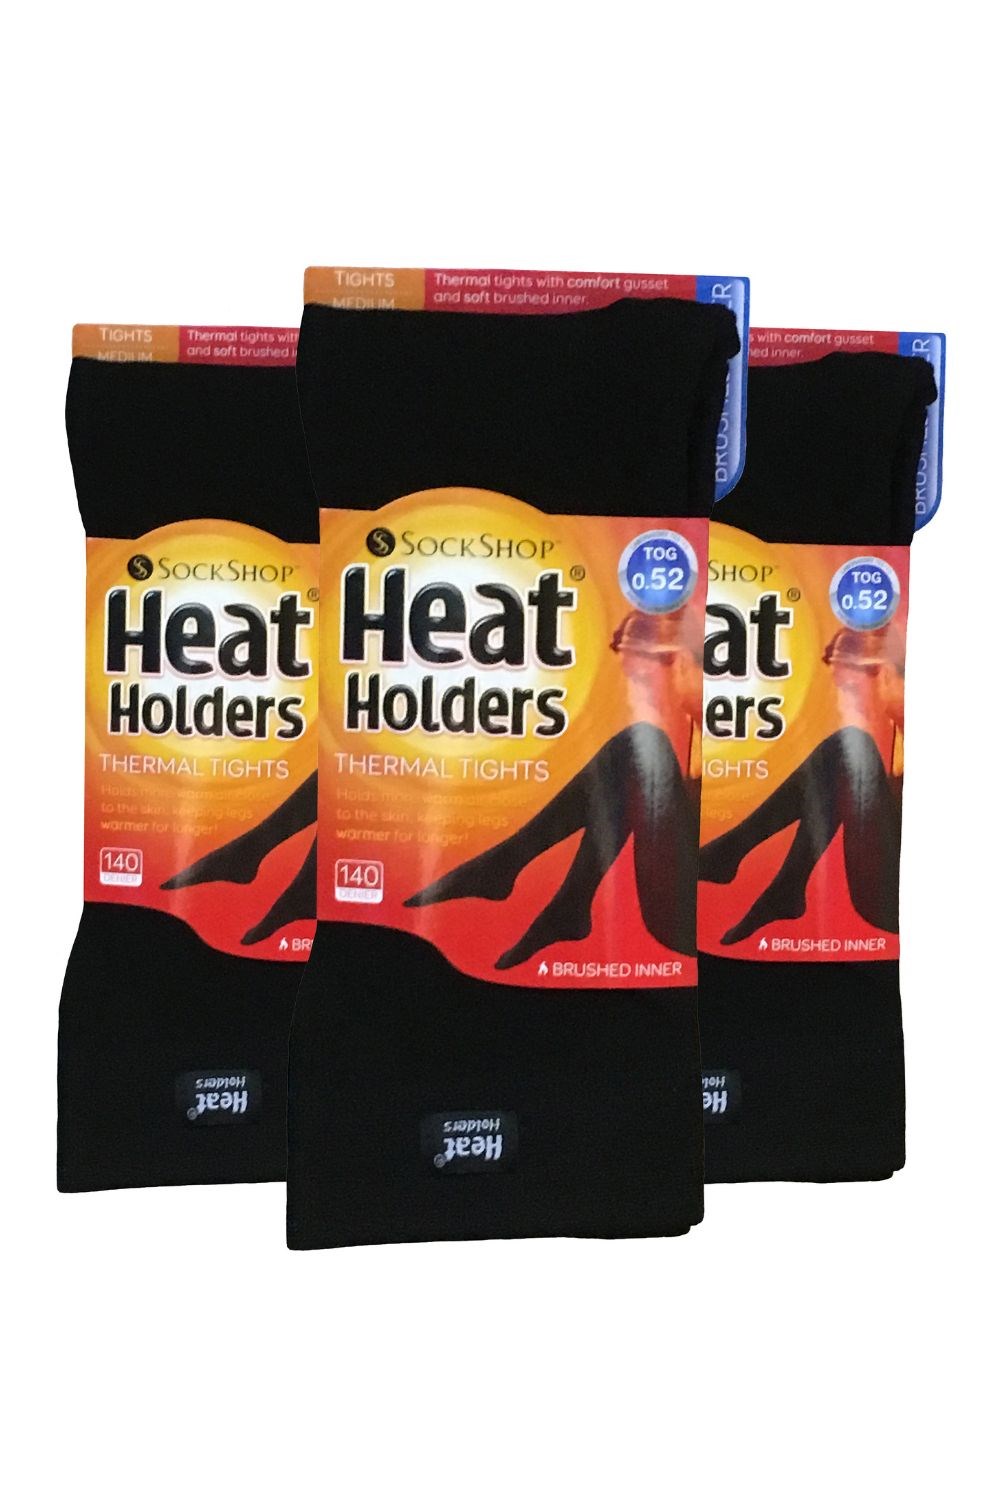 Pack of Heat Holders 140 denier Thermal Tights with brushed inner